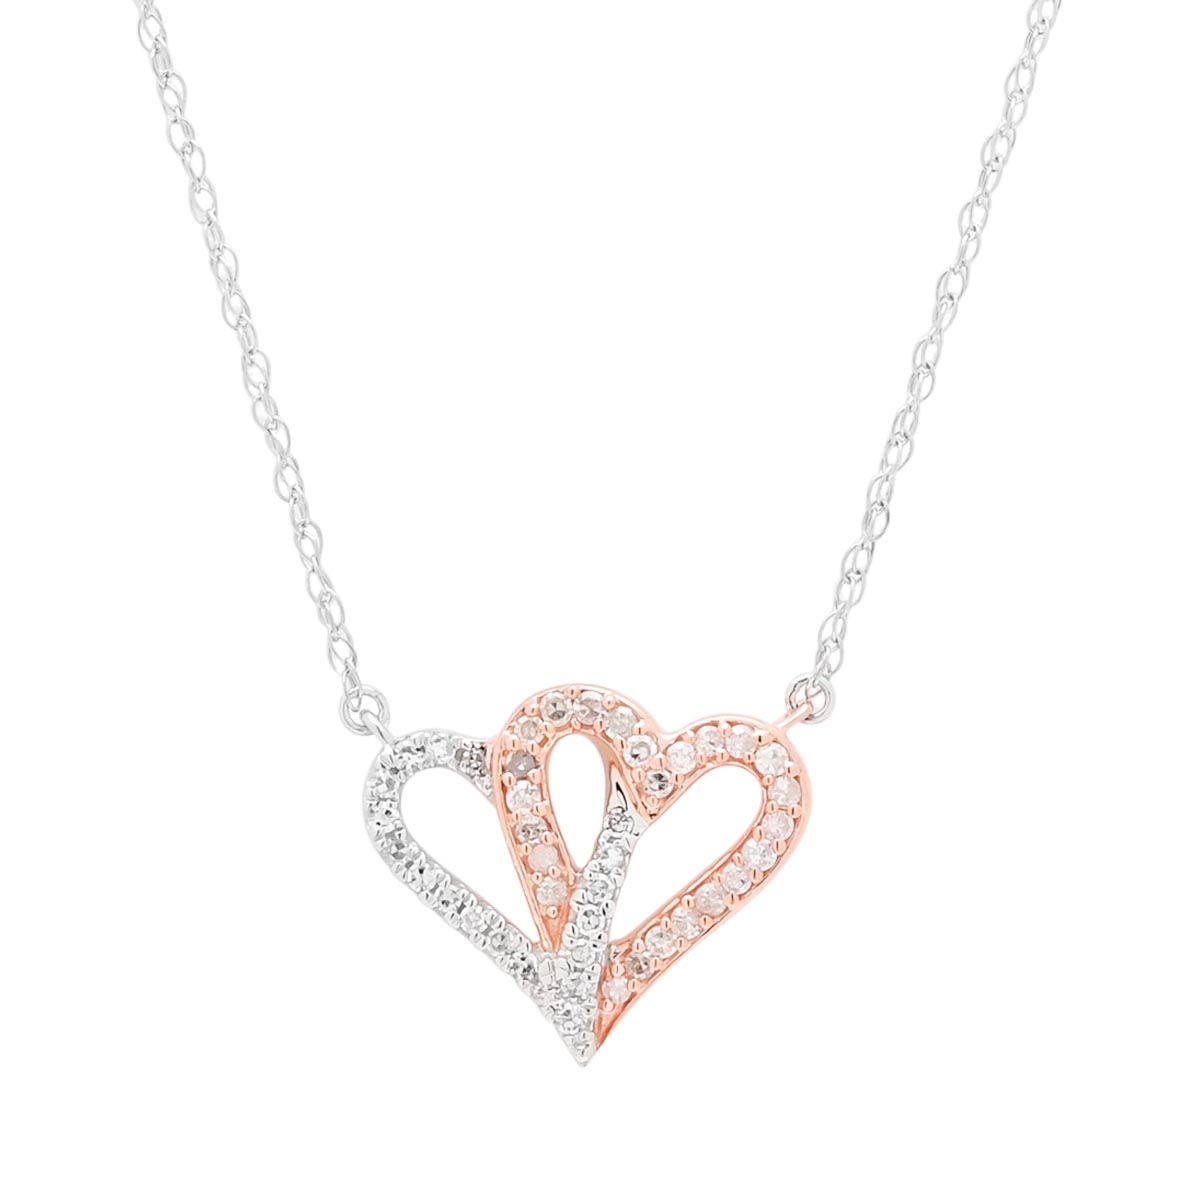 Interlocking Diamond Heart Necklace in 10kt White and Rose Gold (1/10ct tw)